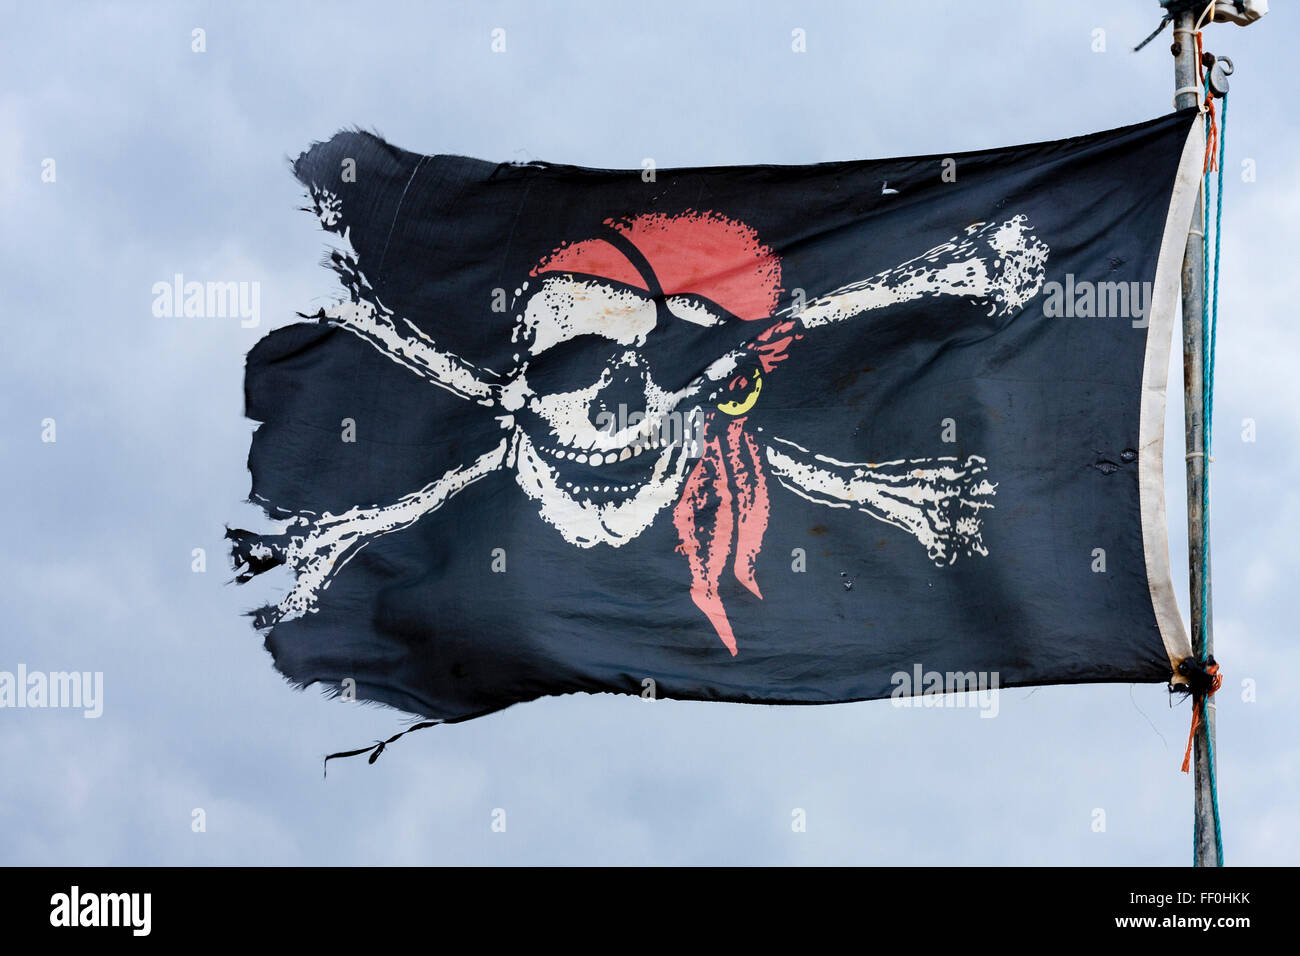 PIRATE FLAG. Flag of the English pirate Our beautiful pictures are